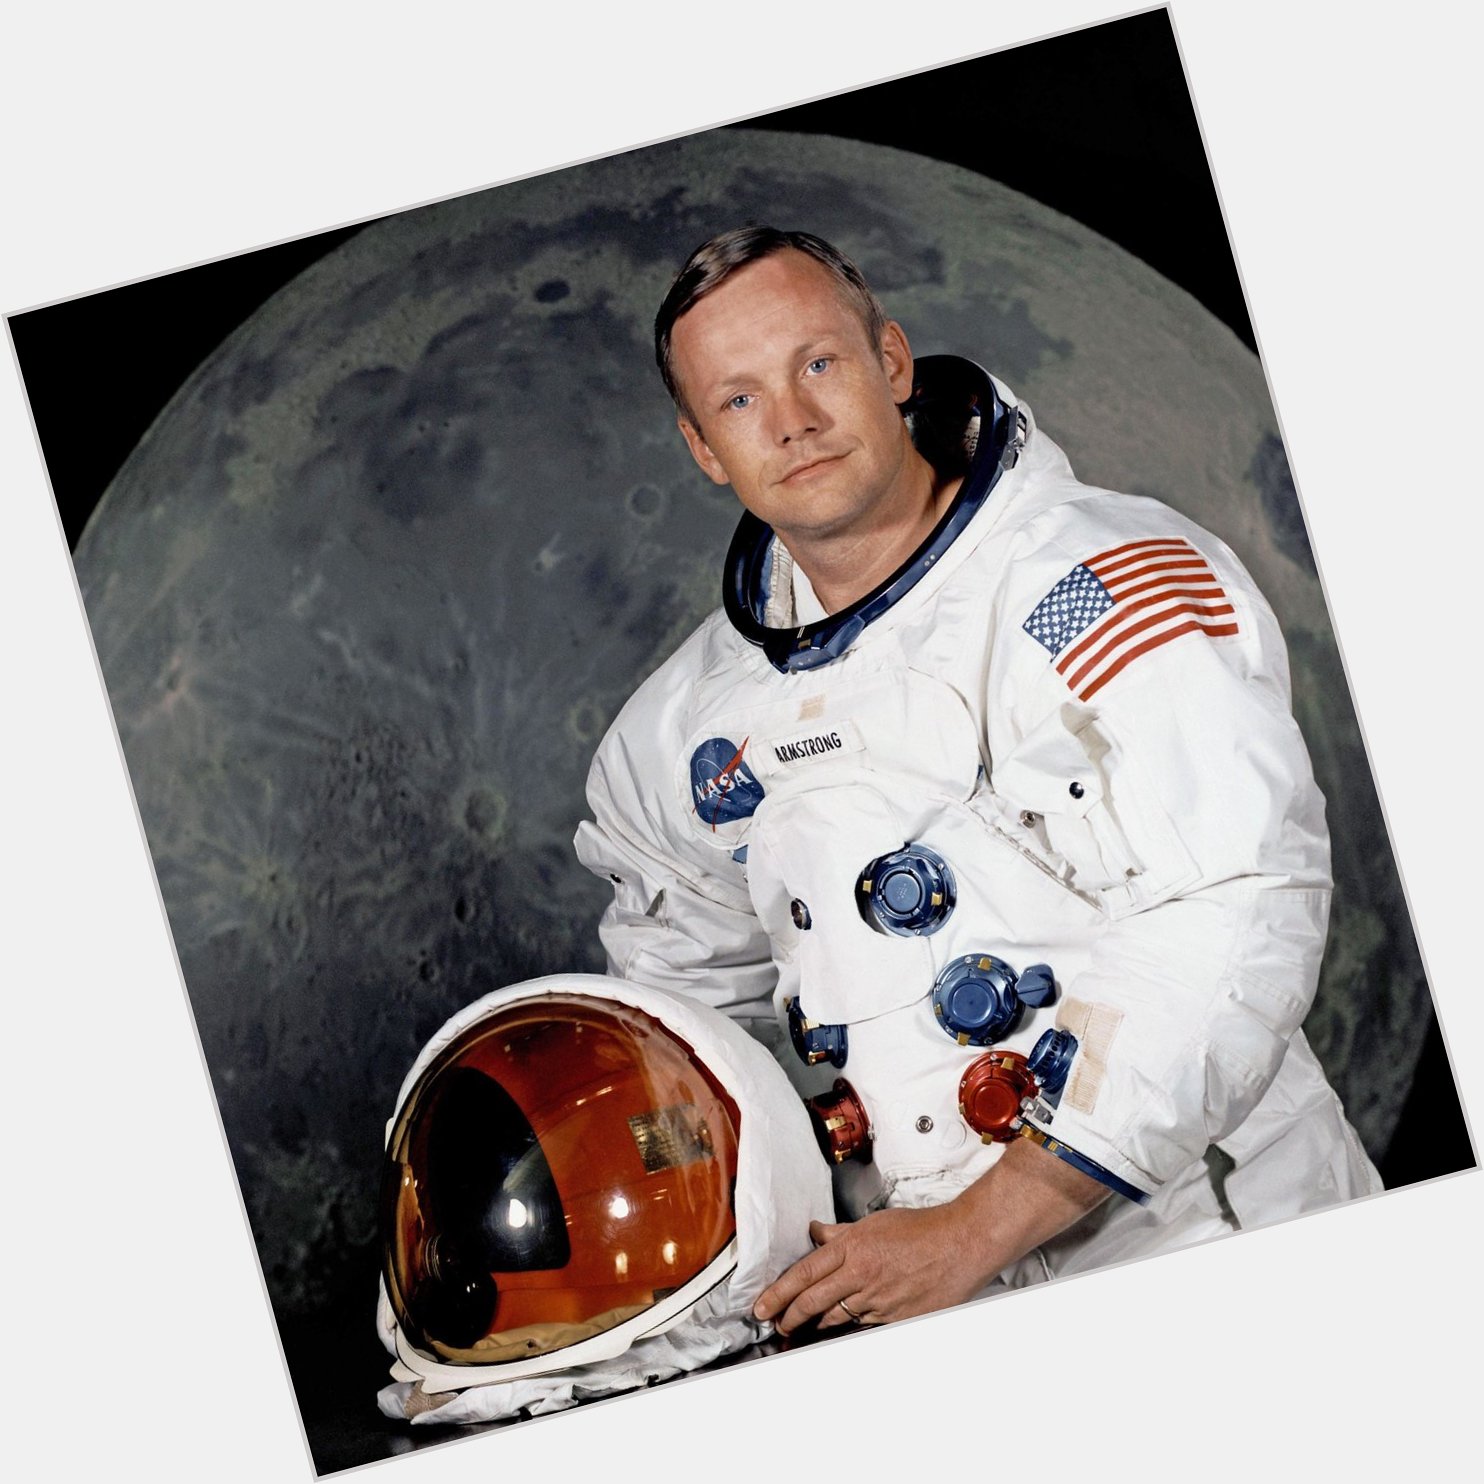 Happy Birthday to the Great Neil Armstrong who would have been 82 years old today!  